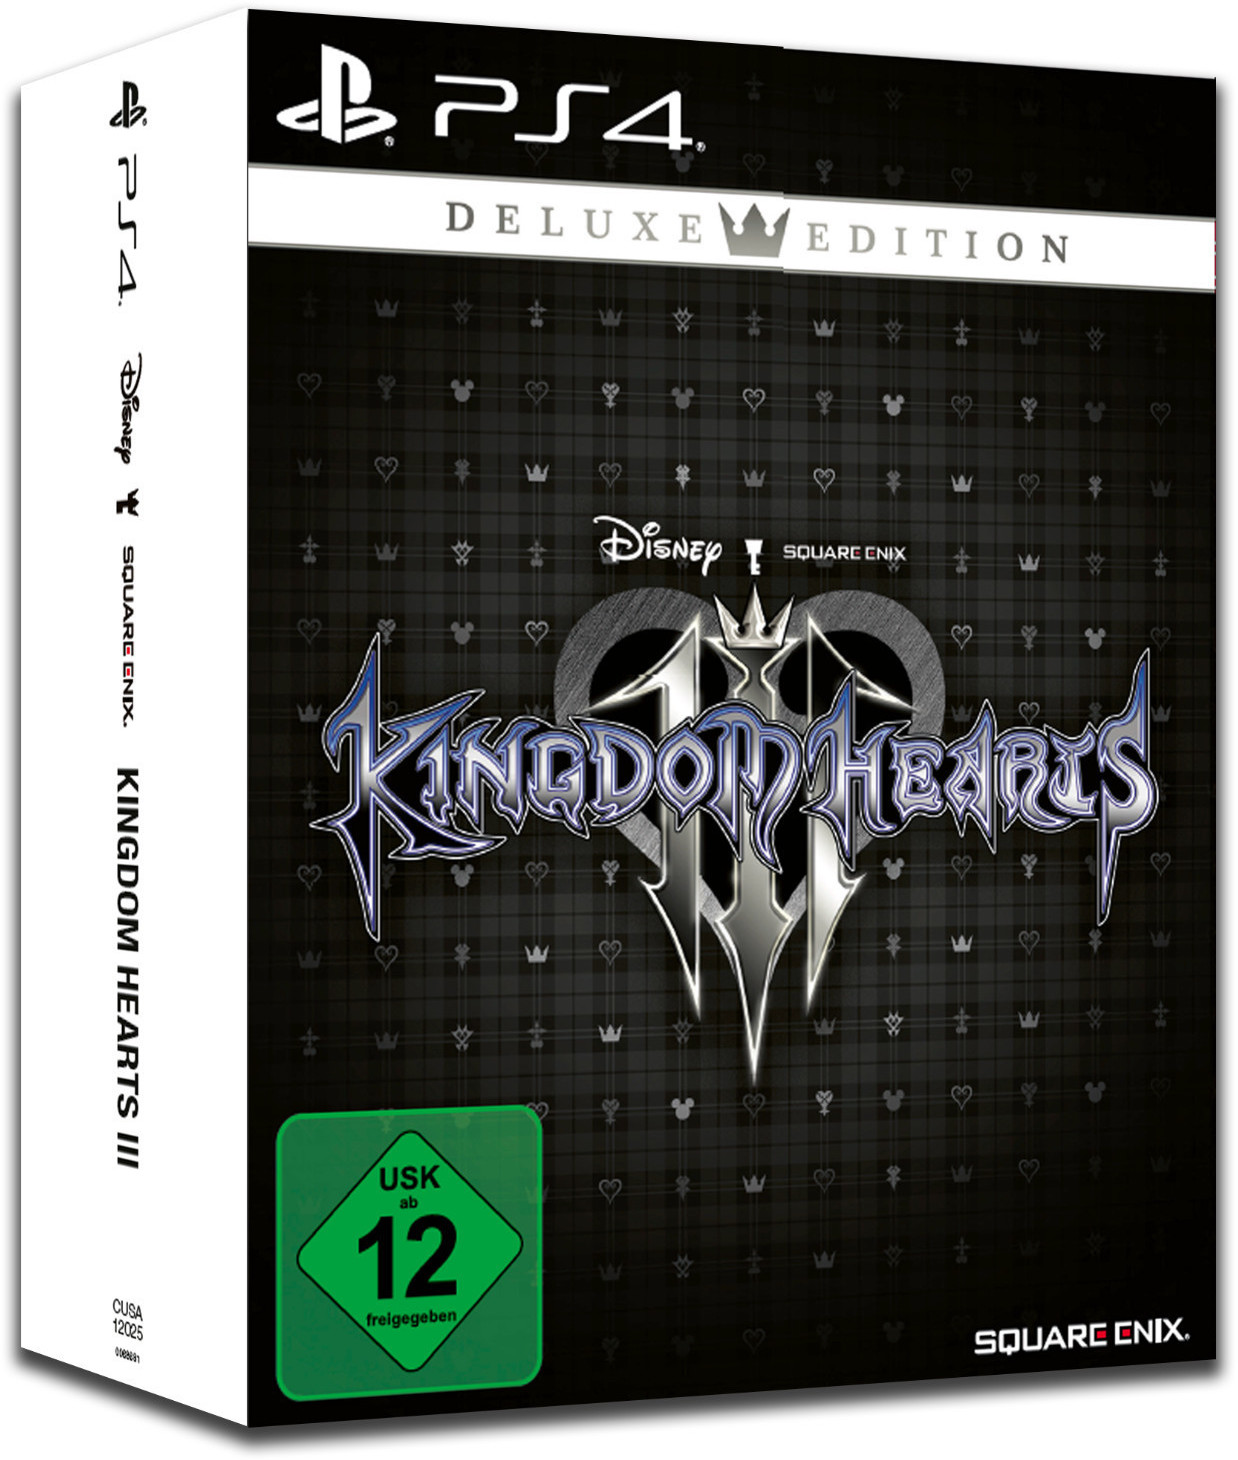 what is the difference between kingdom hearts 3 deluxe edition and kingdom hearts 3